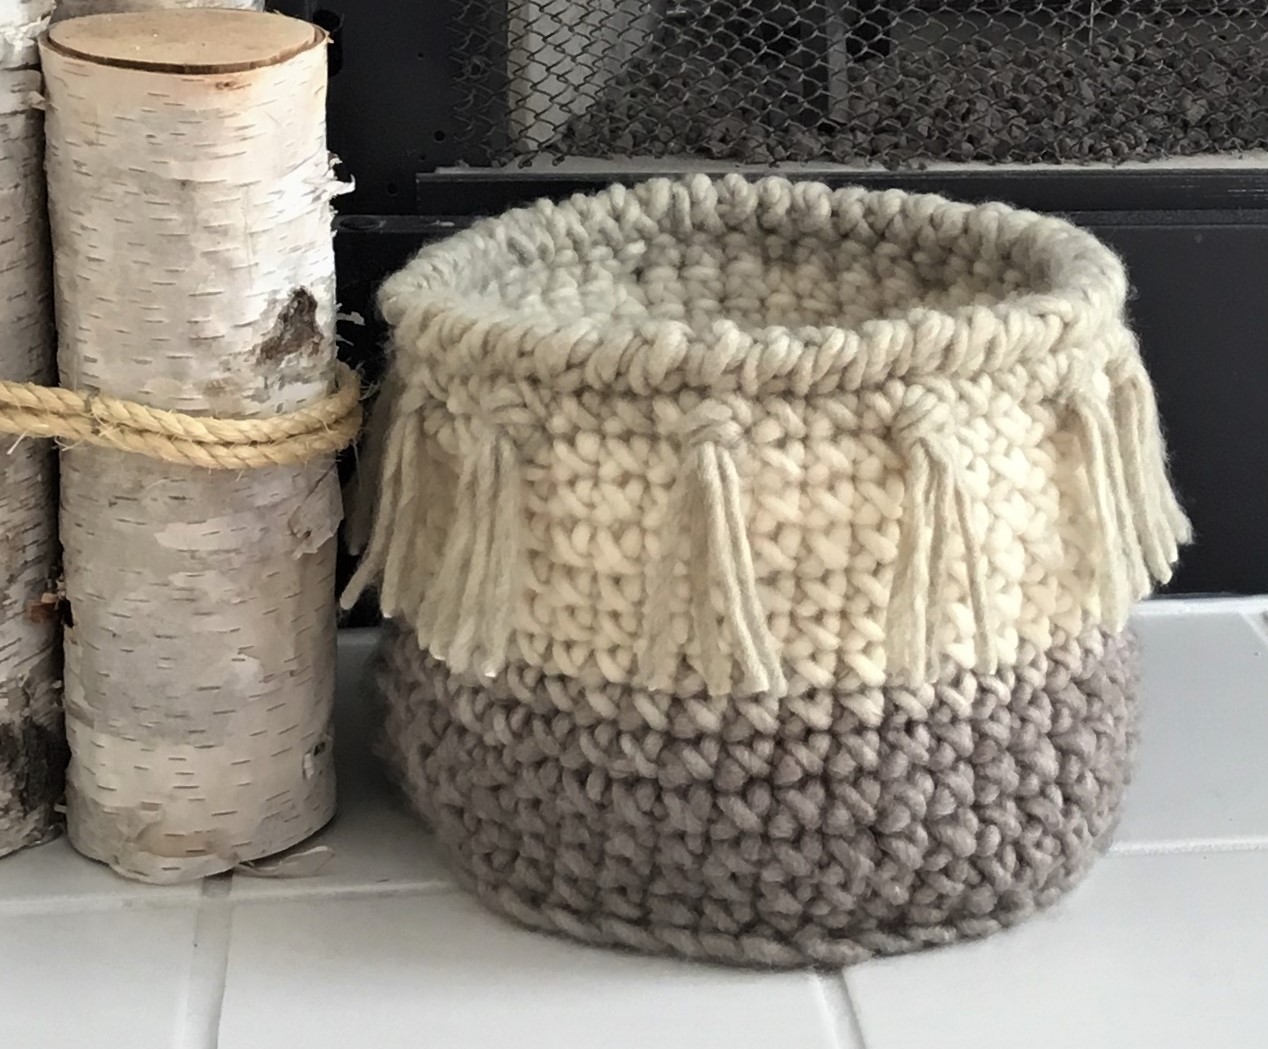 crochet basket to sell at craft shows